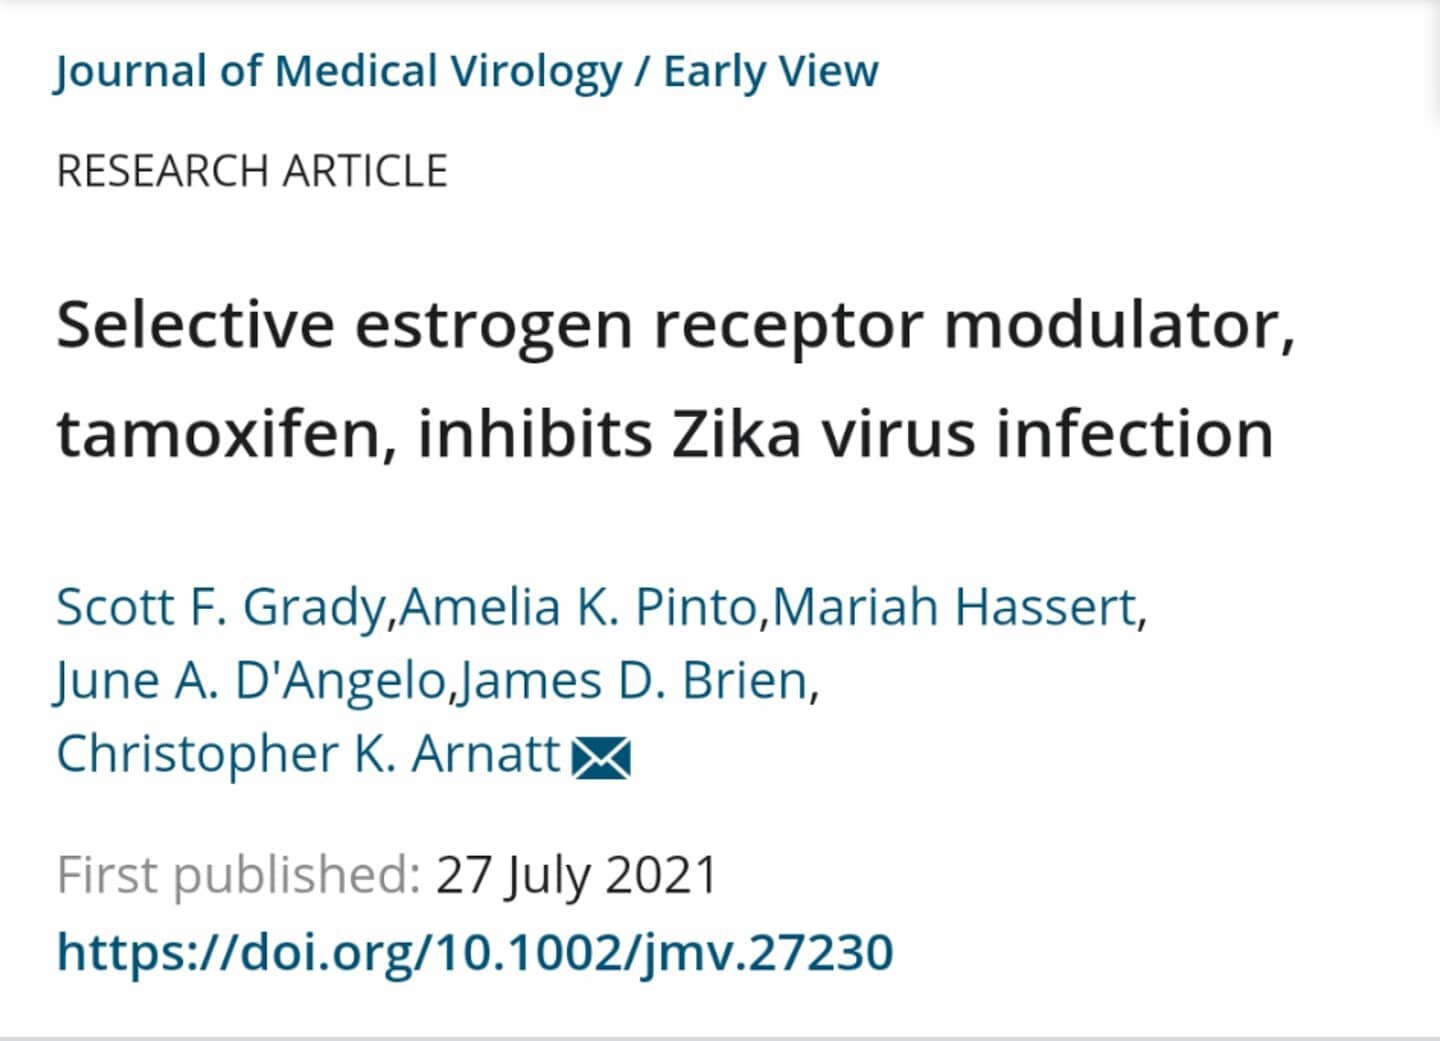 Check out our new paper looking at tamoxifen's effect on the zika virus. #virology #tamoxifen #sideproject